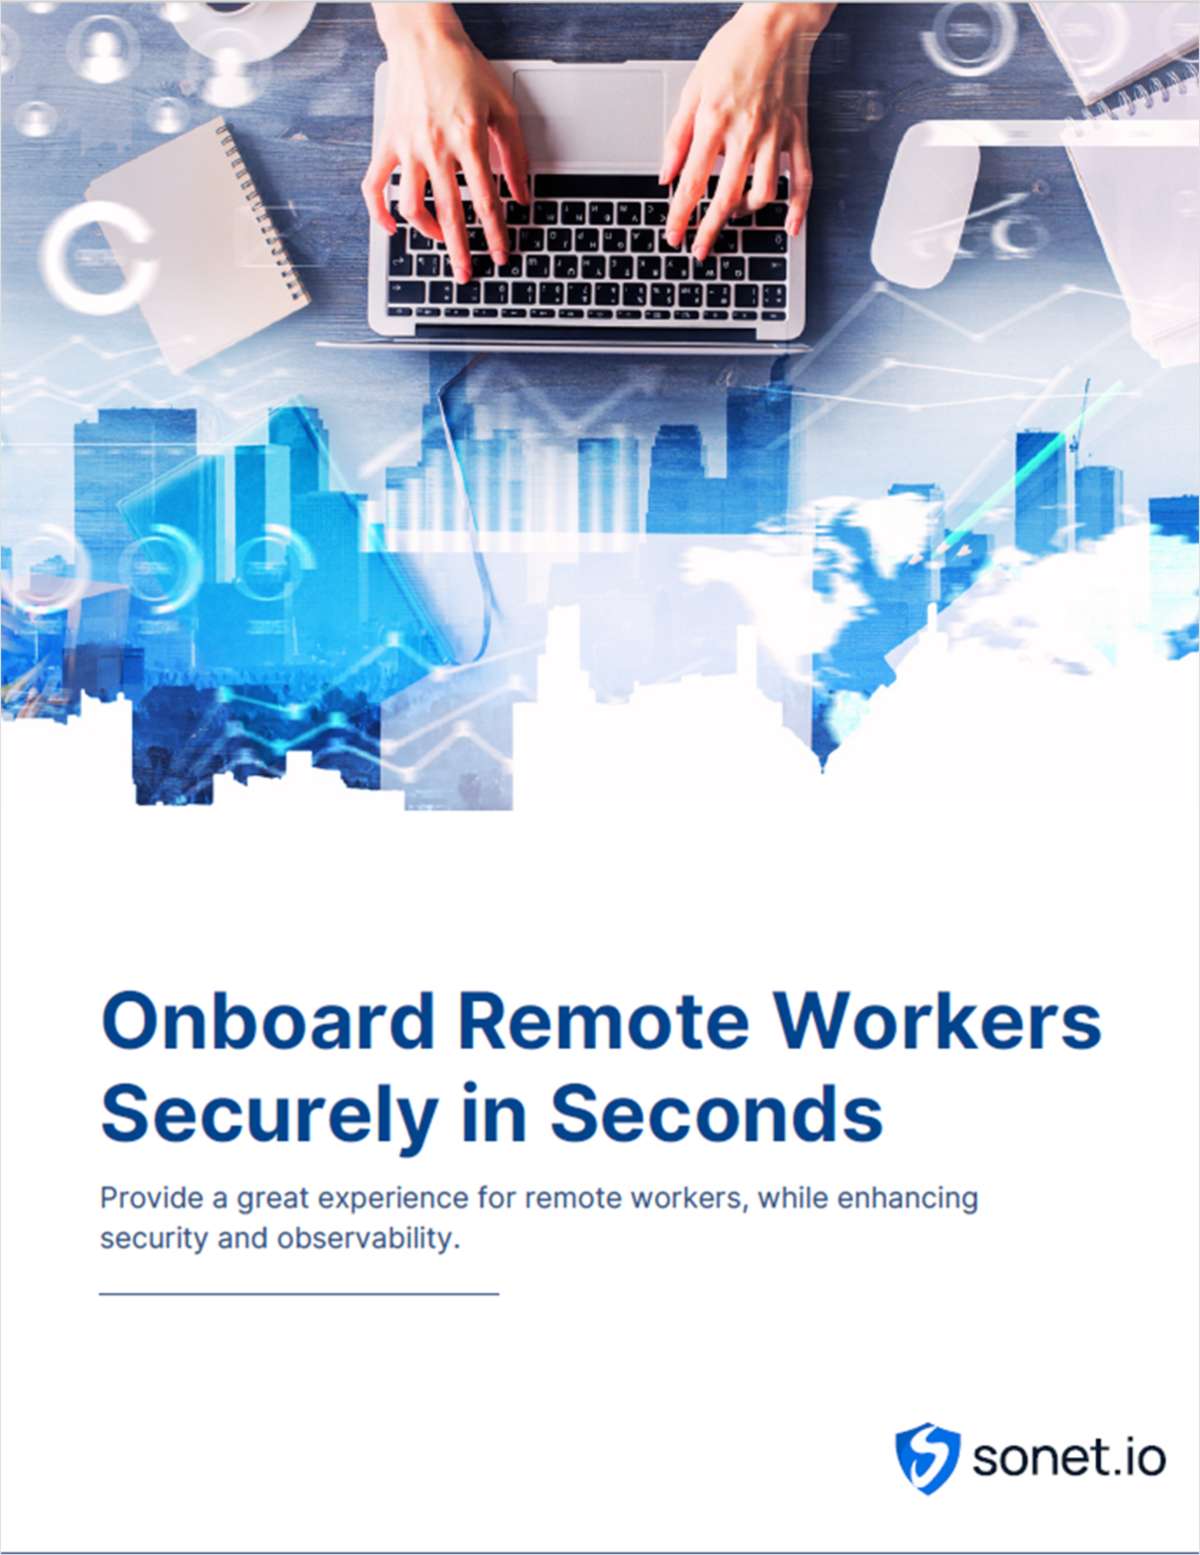 Onboard Remote Workers Securely in Seconds